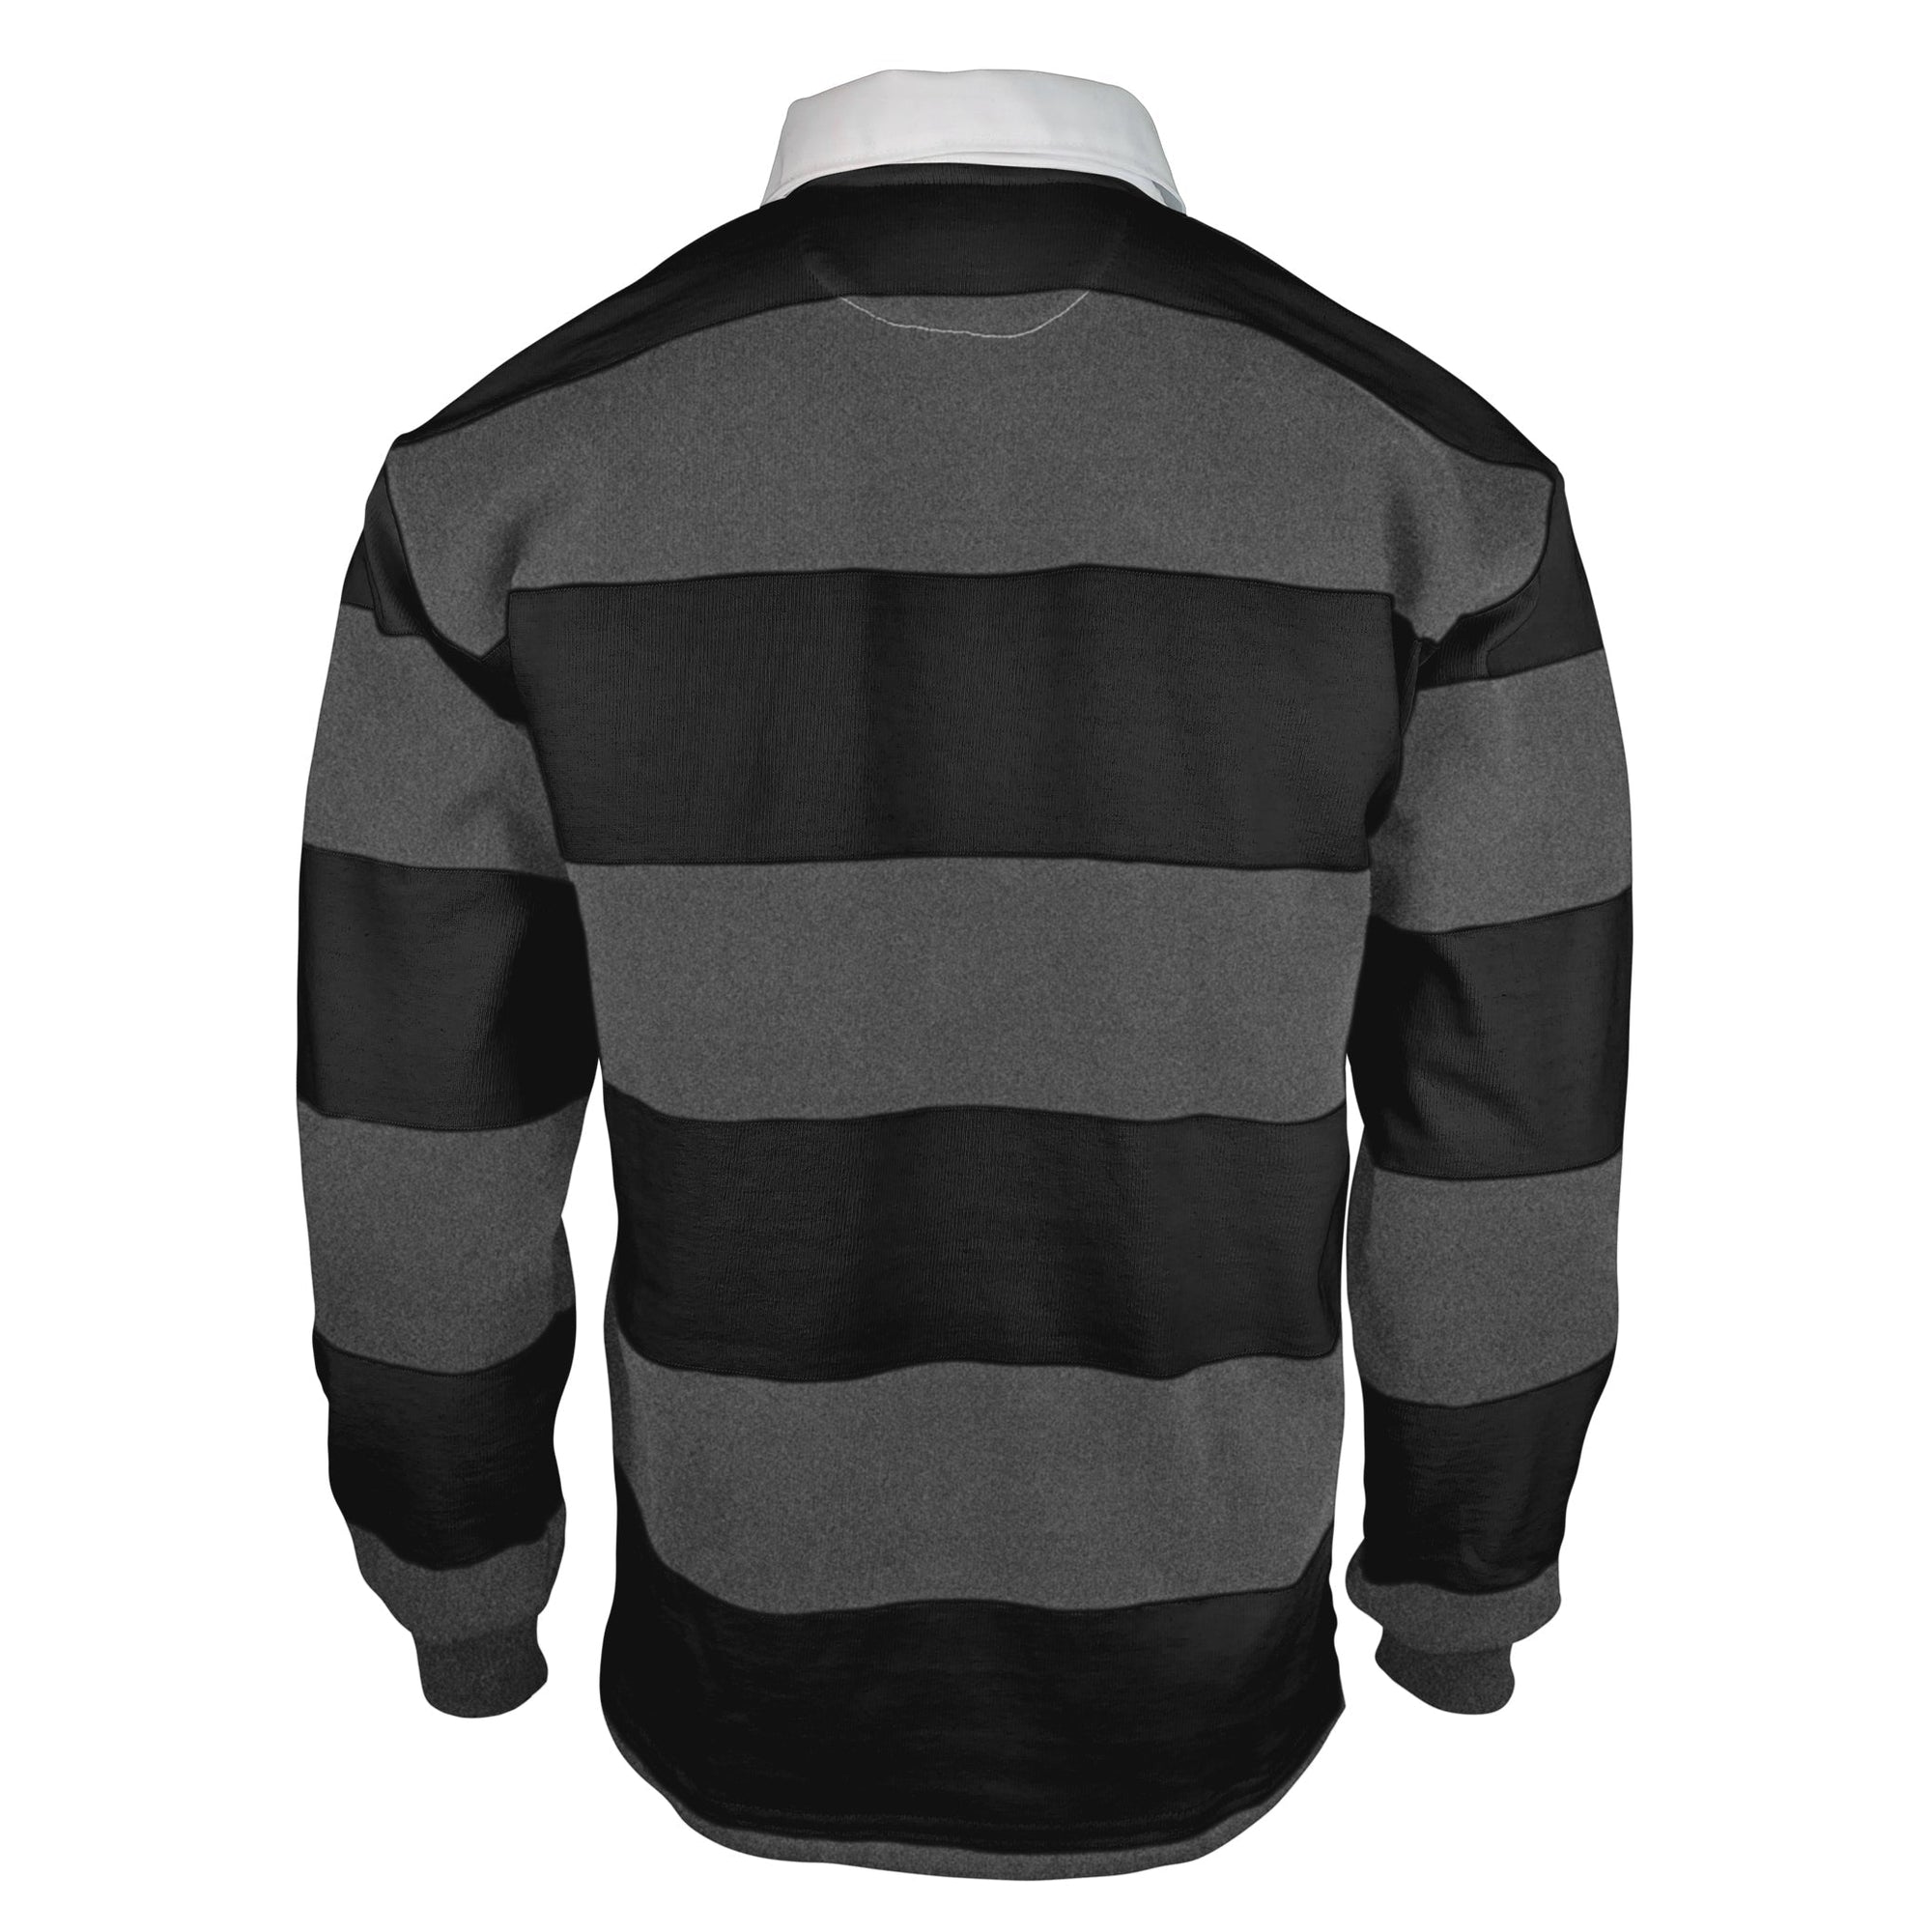 Rugby Imports Providence College Rugby Traditional 4 Inch Stripe Rugby Jersey